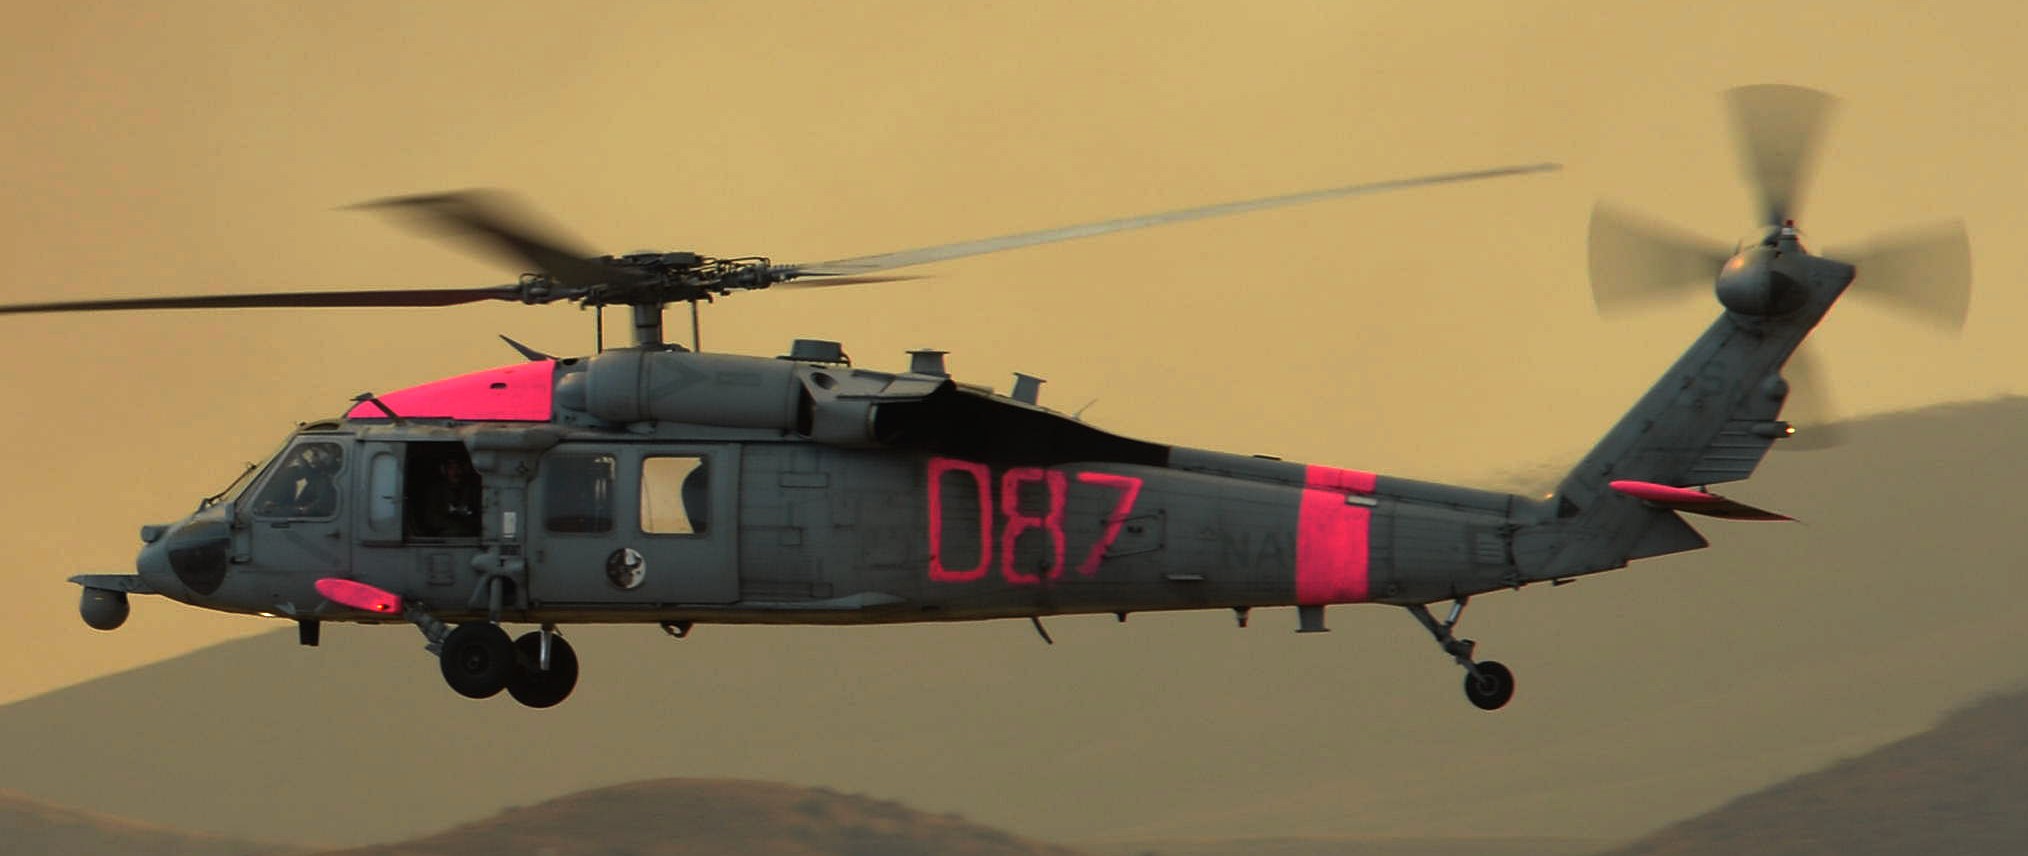 hsc-3 merlins helicopter sea combat squadron mh-60s seahawk us navy 2014 15 camp pendleton california